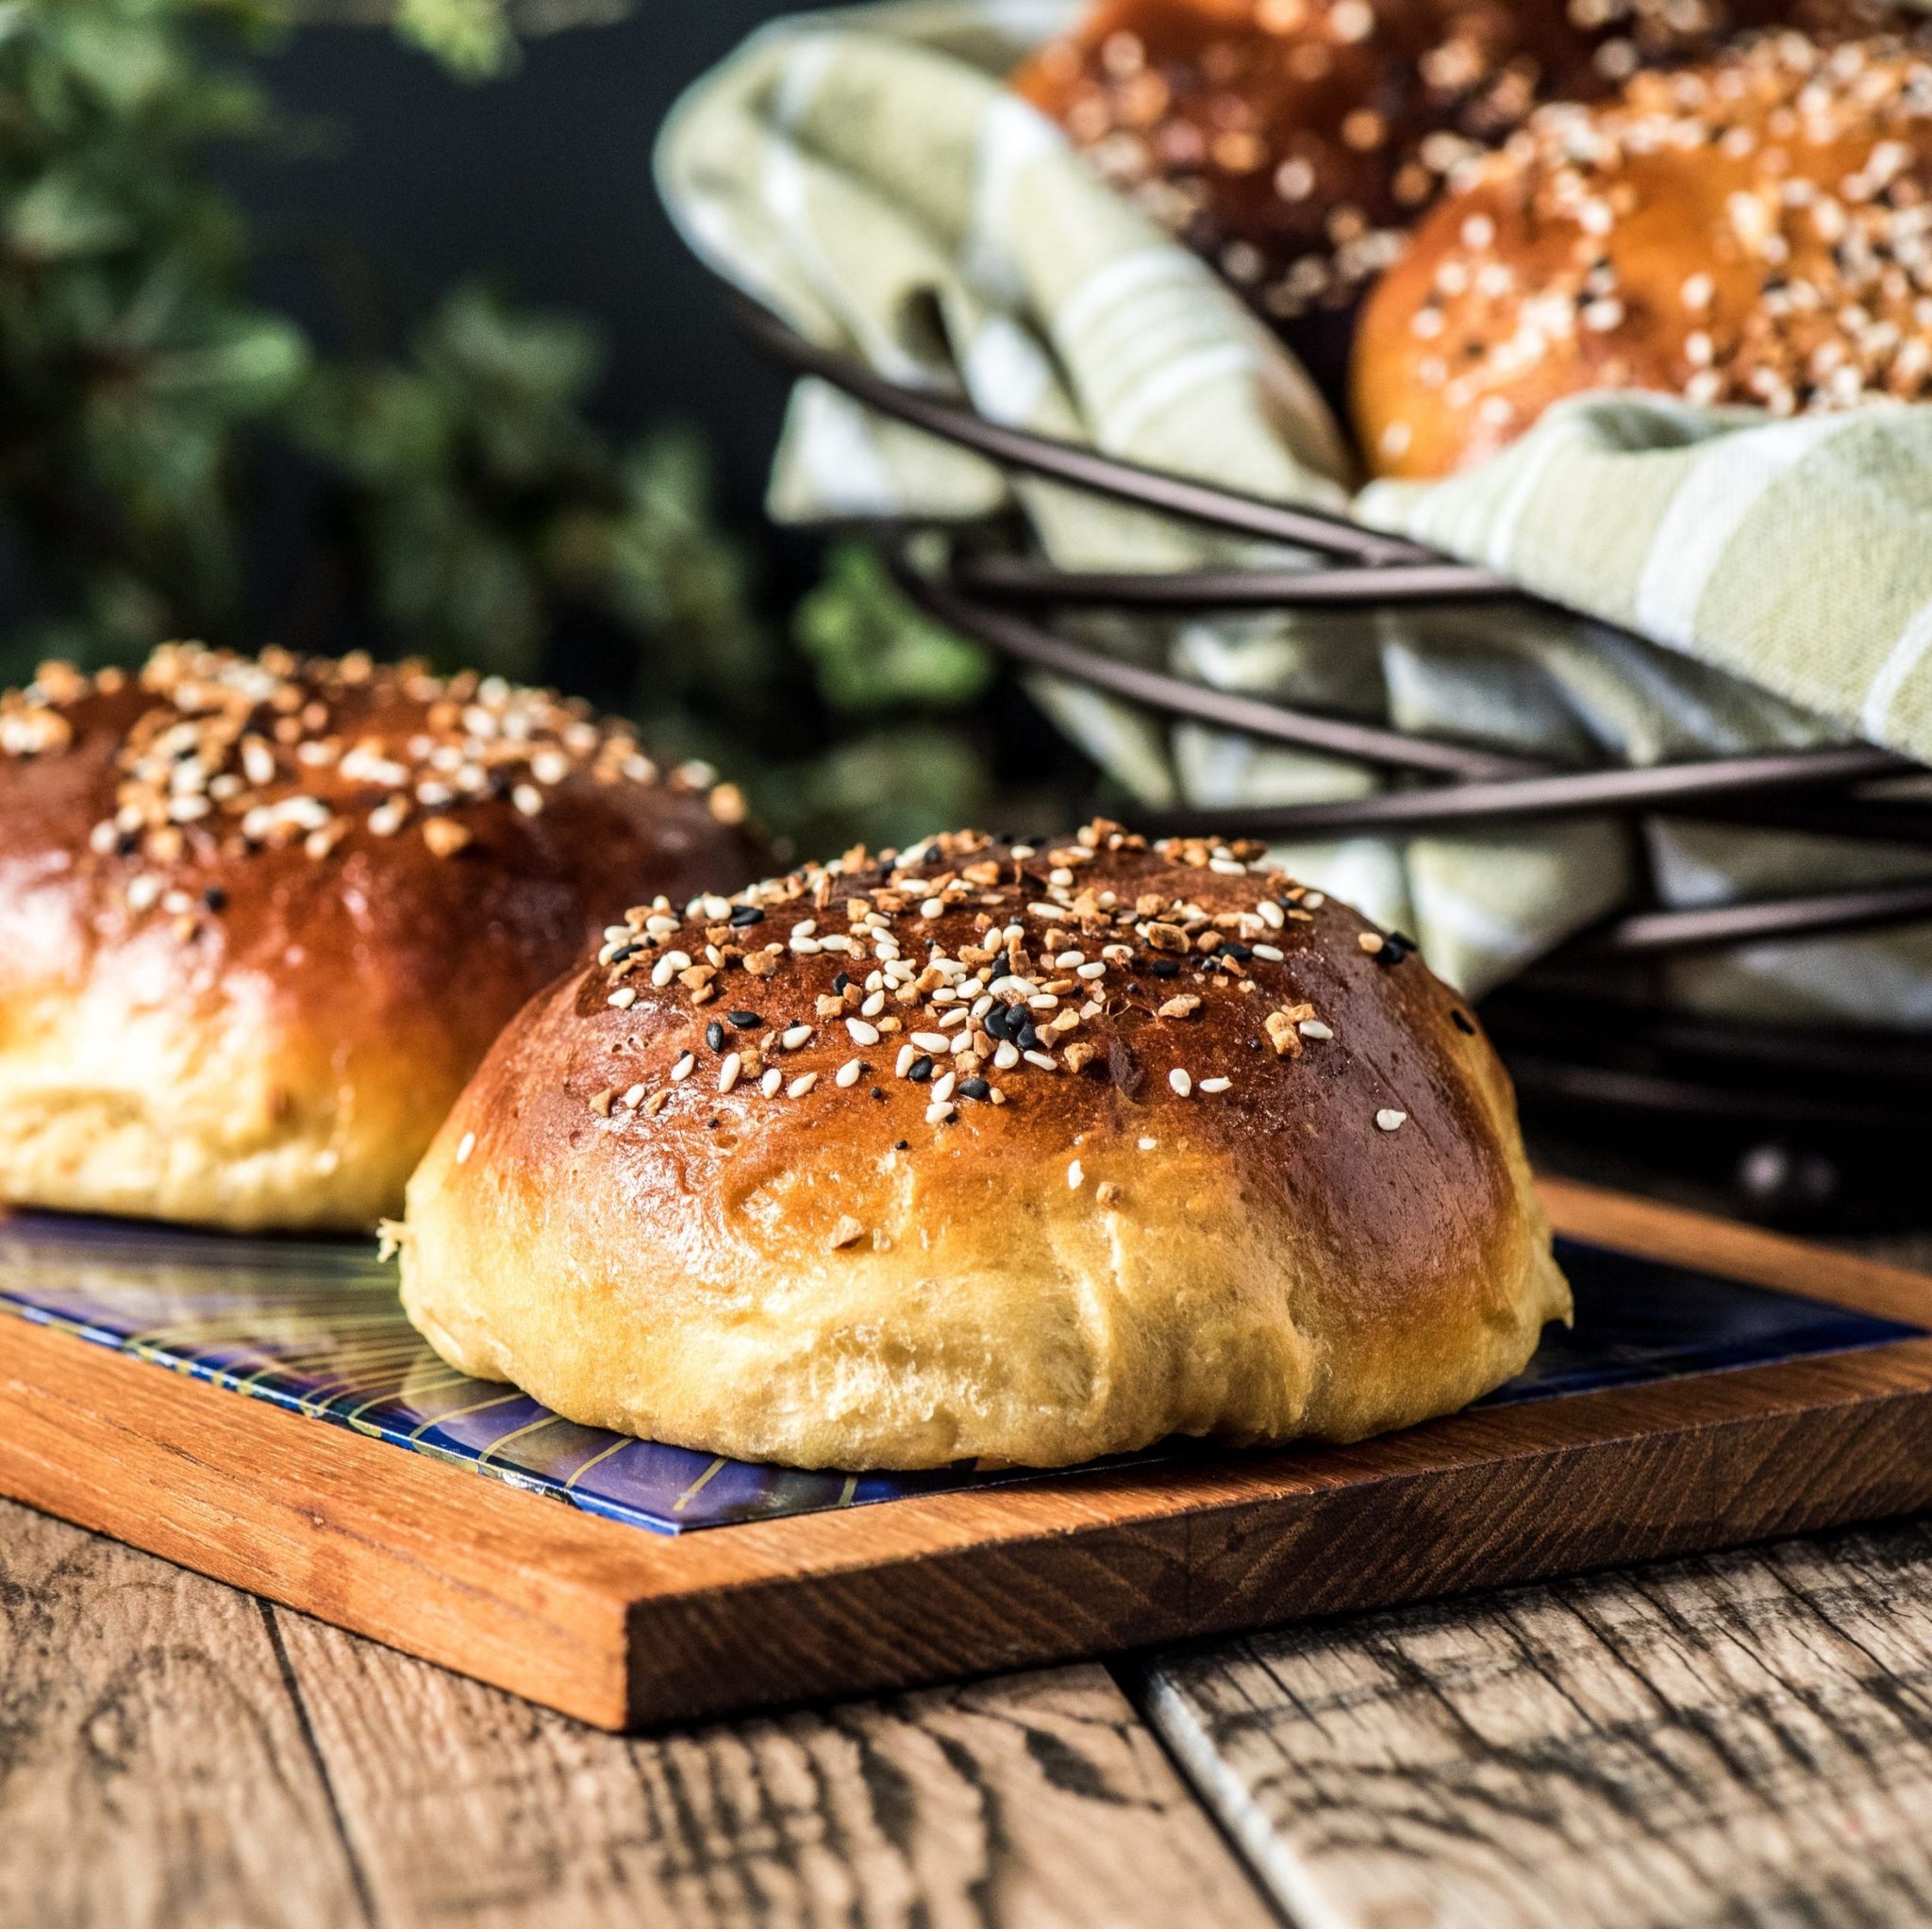 Best Keto Yeast Burger Buns you can bake! We decided to turn this challenge into an exclamation! The goal of creating Keto-friendly burger buns that are soft, sturdy, bread-like, and chewy to the taste is definitely a challenge